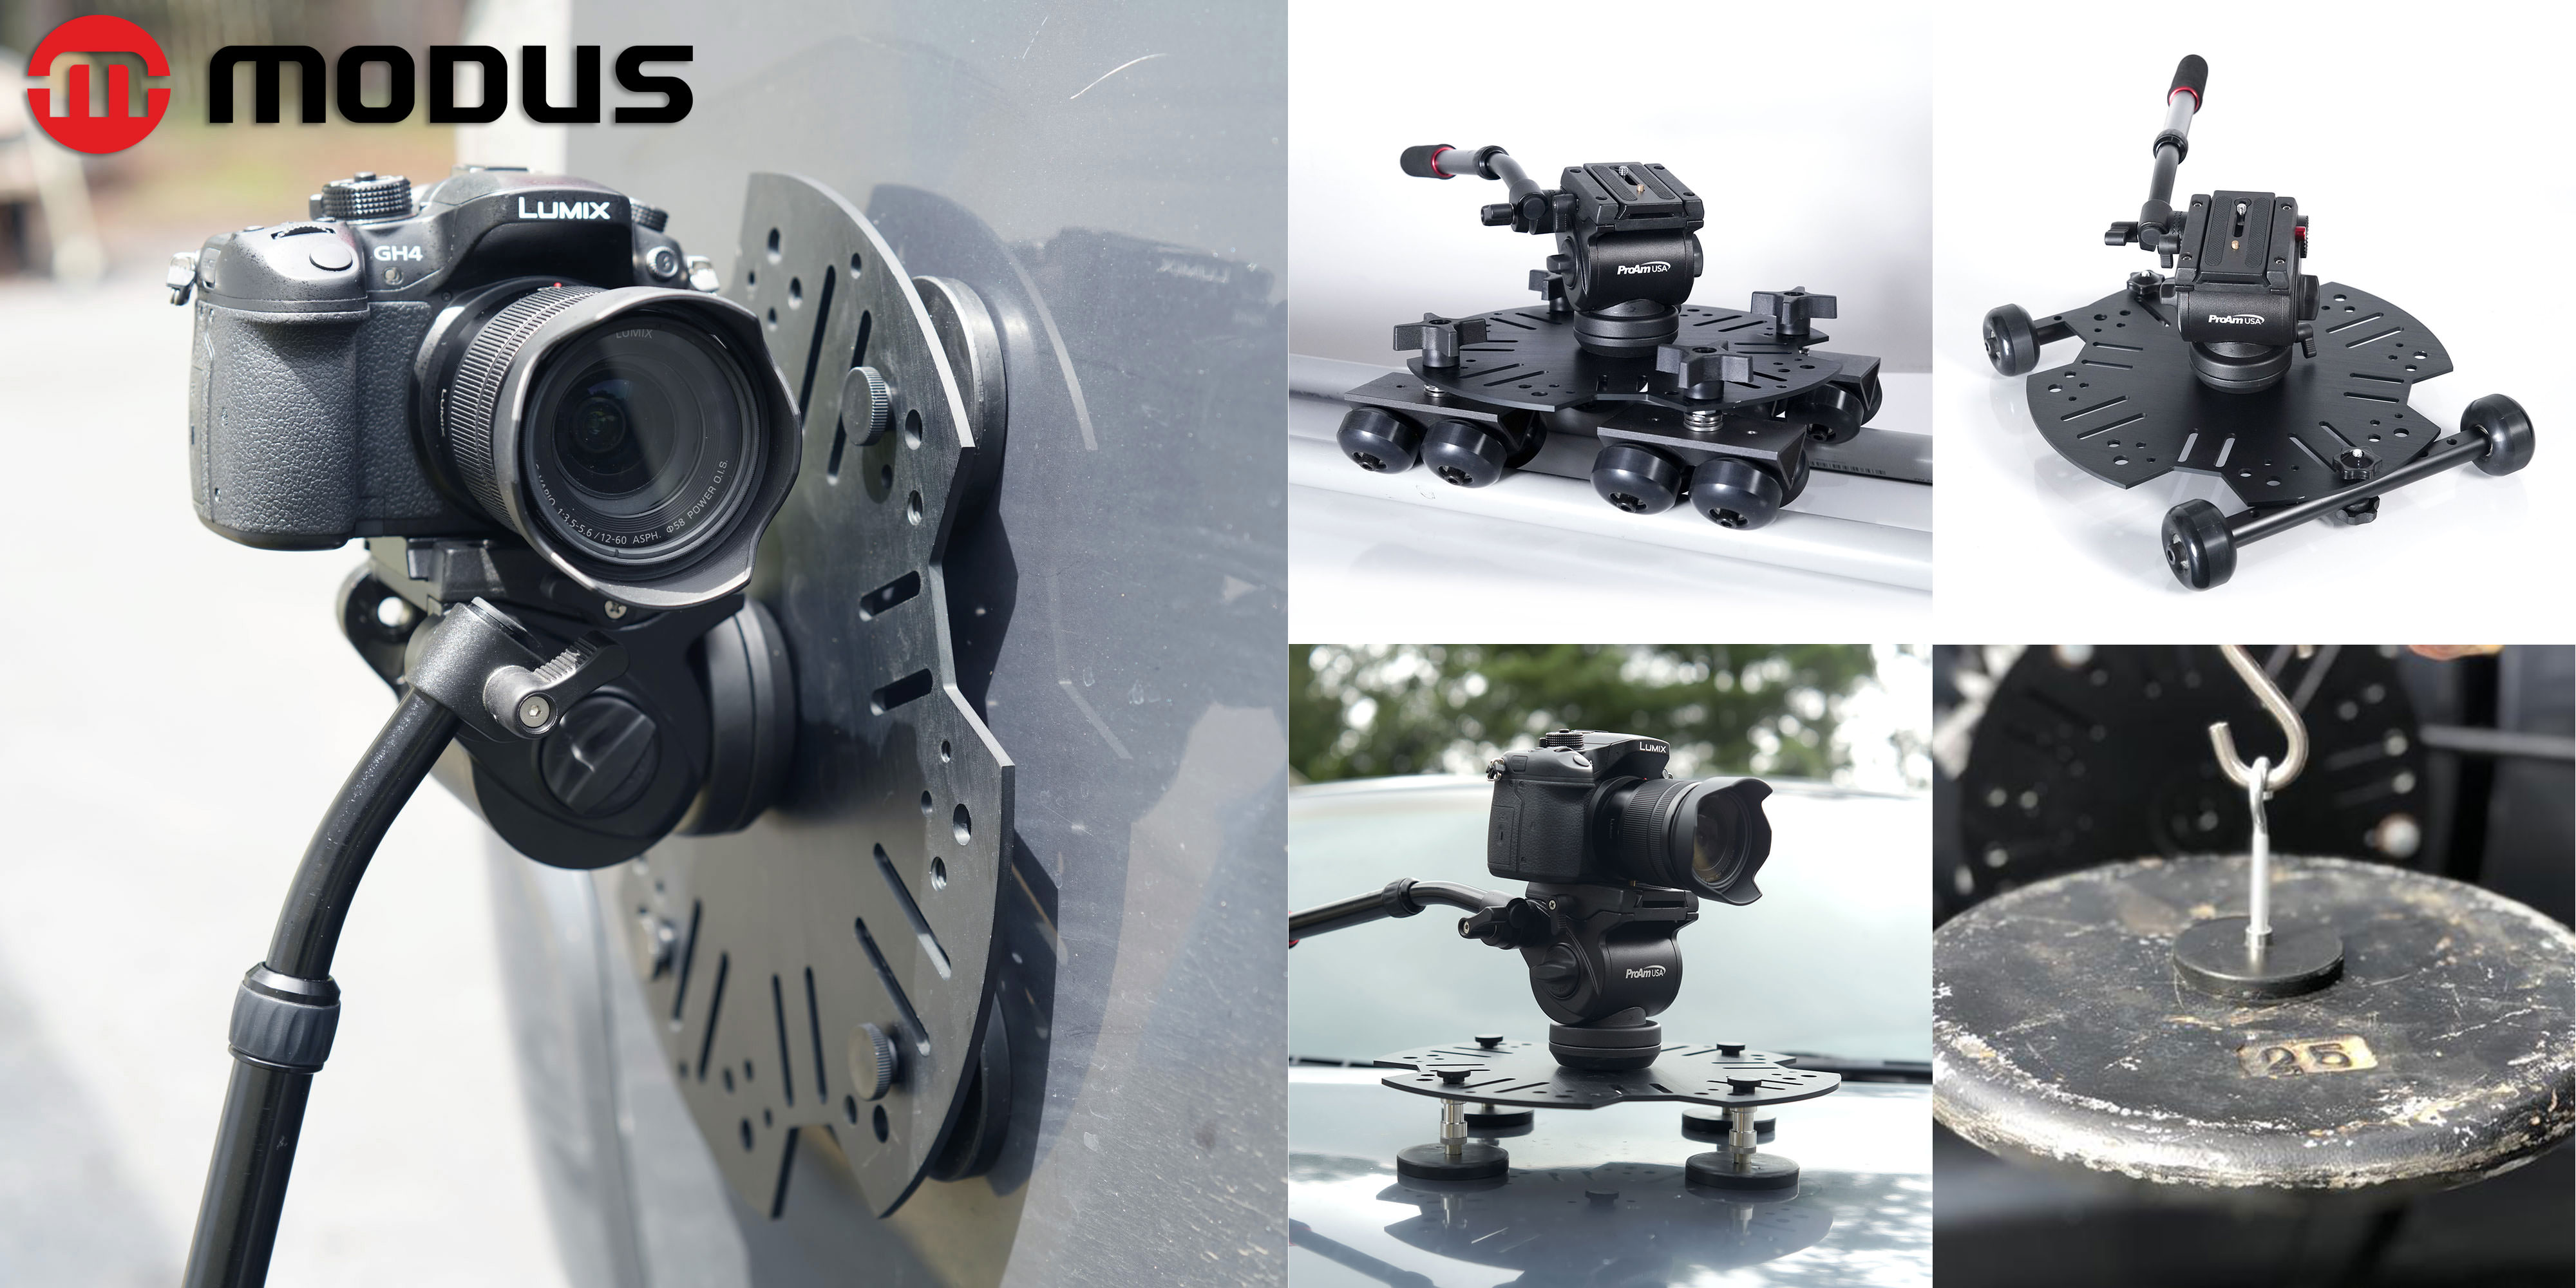 Modus Mount shown in a variety of configurations